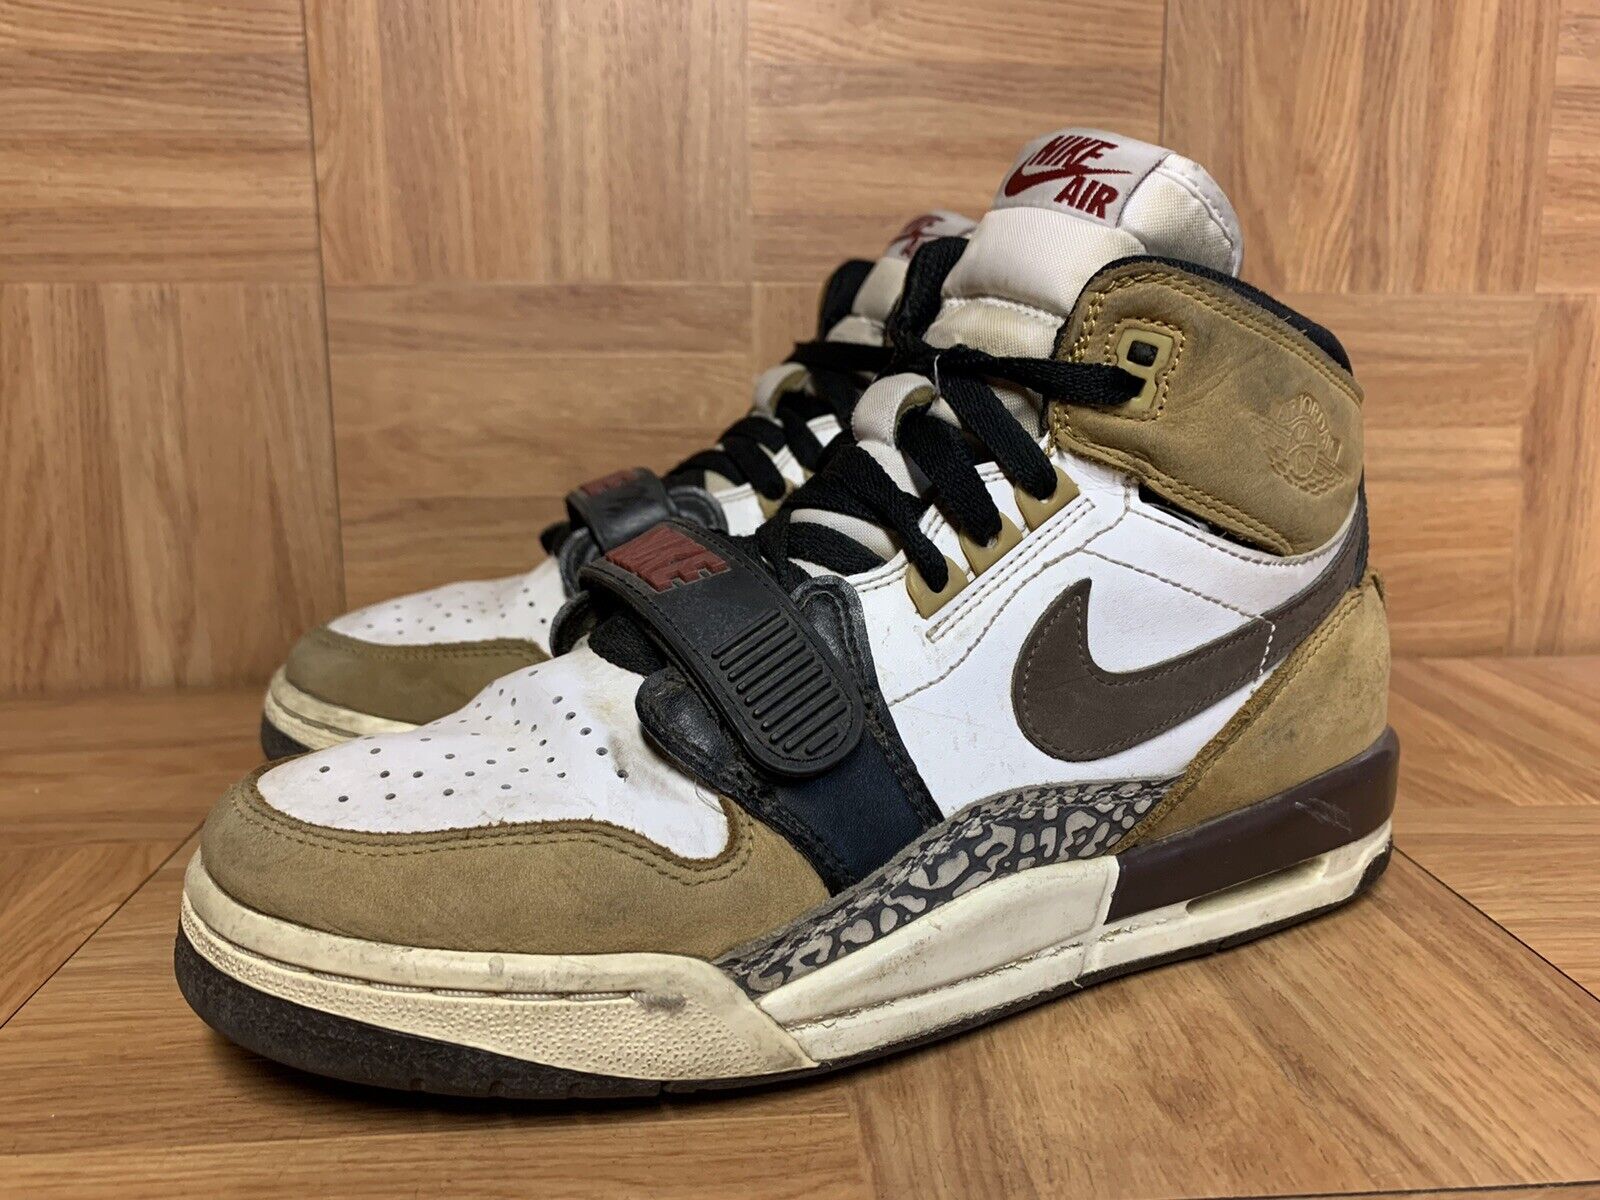 RARE🔥 Nike Air Jordan Legacy 312 Rookie Of The Year 6.5Y Boys Shoes  AT4040-102